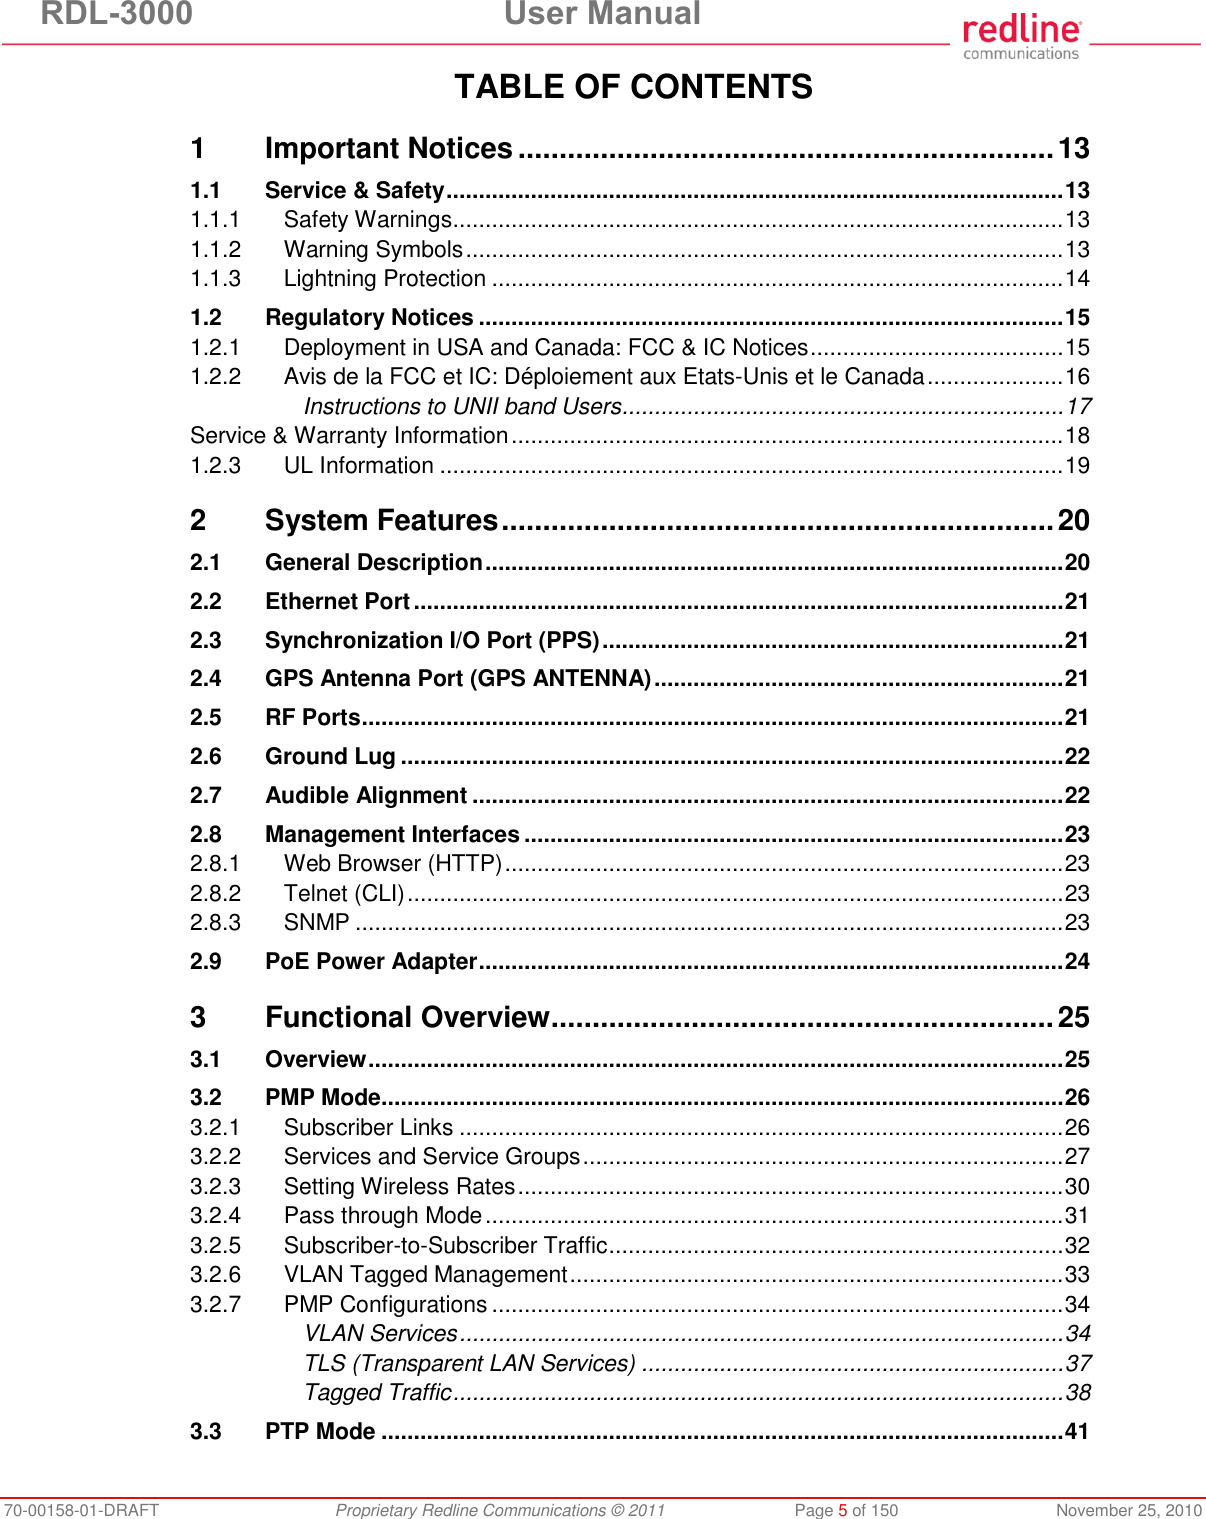 RDL-3000  User Manual 70-00158-01-DRAFT  Proprietary Redline Communications © 2011  Page 5 of 150  November 25, 2010 TABLE OF CONTENTS 1 Important Notices ................................................................. 13 1.1 Service &amp; Safety ............................................................................................... 13 1.1.1 Safety Warnings .............................................................................................. 13 1.1.2 Warning Symbols ............................................................................................ 13 1.1.3 Lightning Protection ........................................................................................ 14 1.2 Regulatory Notices .......................................................................................... 15 1.2.1 Deployment in USA and Canada: FCC &amp; IC Notices ....................................... 15 1.2.2 Avis de la FCC et IC: Déploiement aux Etats-Unis et le Canada ..................... 16 Instructions to UNII band Users .................................................................... 17 Service &amp; Warranty Information ..................................................................................... 18 1.2.3 UL Information ................................................................................................ 19 2 System Features ................................................................... 20 2.1 General Description ......................................................................................... 20 2.2 Ethernet Port .................................................................................................... 21 2.3 Synchronization I/O Port (PPS) ....................................................................... 21 2.4 GPS Antenna Port (GPS ANTENNA) ............................................................... 21 2.5 RF Ports ............................................................................................................ 21 2.6 Ground Lug ...................................................................................................... 22 2.7 Audible Alignment ........................................................................................... 22 2.8 Management Interfaces ................................................................................... 23 2.8.1 Web Browser (HTTP) ...................................................................................... 23 2.8.2 Telnet (CLI) ..................................................................................................... 23 2.8.3 SNMP ............................................................................................................. 23 2.9 PoE Power Adapter .......................................................................................... 24 3 Functional Overview ............................................................. 25 3.1 Overview ........................................................................................................... 25 3.2 PMP Mode ......................................................................................................... 26 3.2.1 Subscriber Links ............................................................................................. 26 3.2.2 Services and Service Groups .......................................................................... 27 3.2.3 Setting Wireless Rates .................................................................................... 30 3.2.4 Pass through Mode ......................................................................................... 31 3.2.5 Subscriber-to-Subscriber Traffic ...................................................................... 32 3.2.6 VLAN Tagged Management ............................................................................ 33 3.2.7 PMP Configurations ........................................................................................ 34 VLAN Services ............................................................................................. 34 TLS (Transparent LAN Services) ................................................................. 37 Tagged Traffic .............................................................................................. 38 3.3 PTP Mode ......................................................................................................... 41 